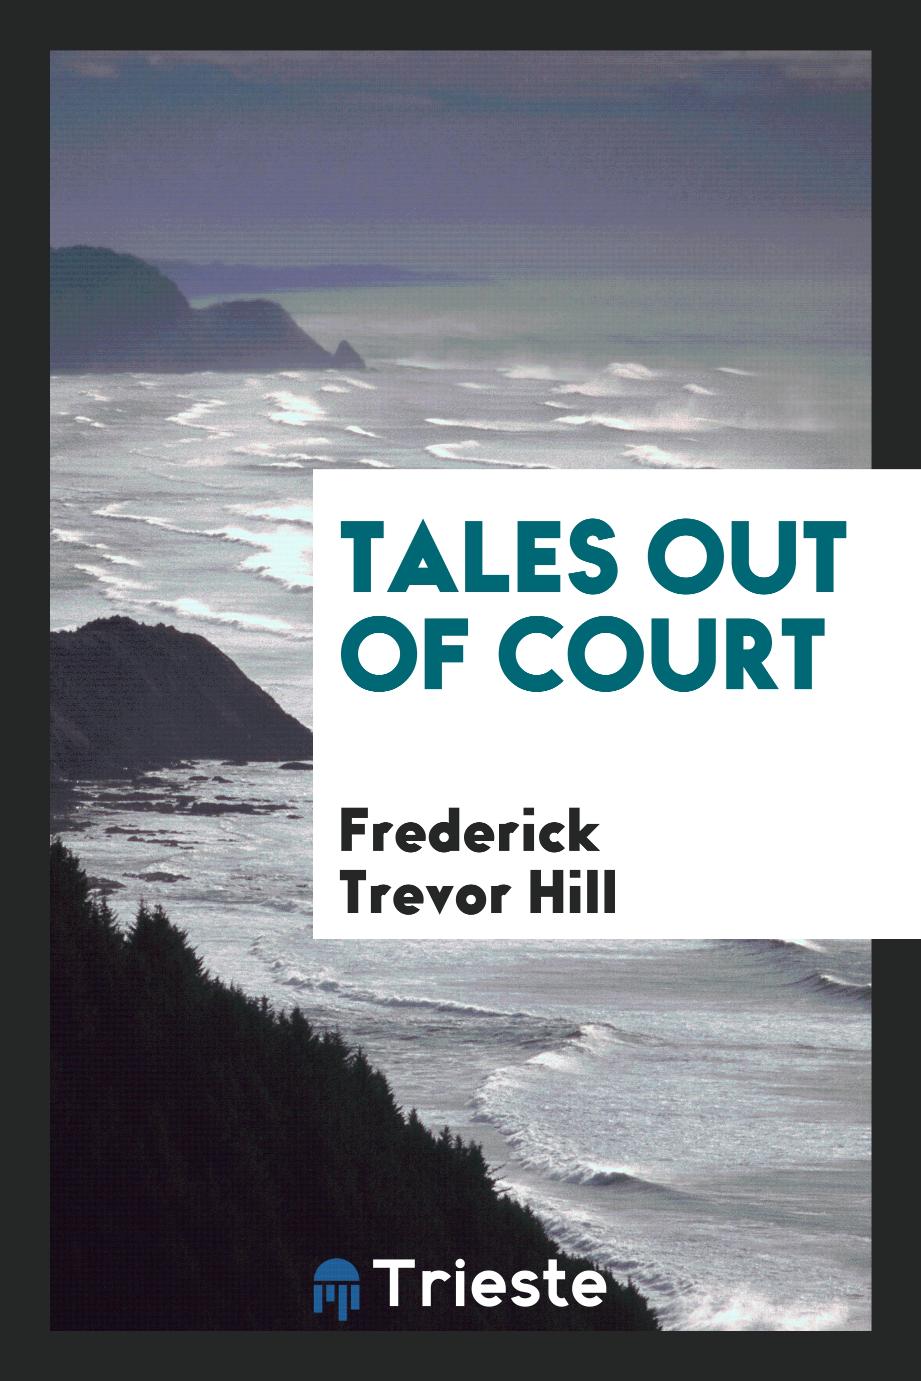 Tales out of court